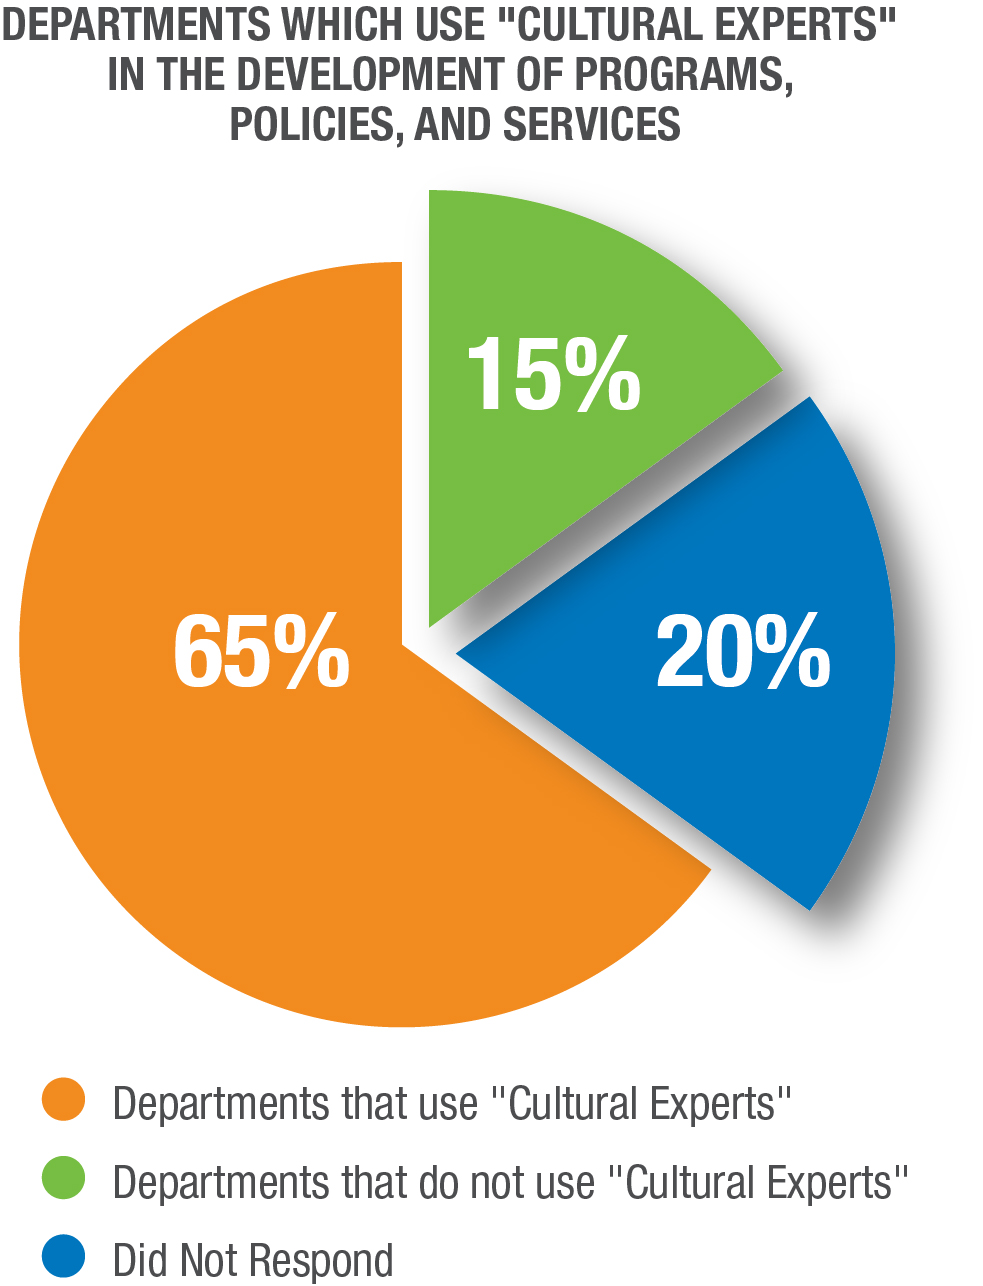 Pie chart, depicting the number of departments that use “cultural experts” in the development of their programs, policies, and services.